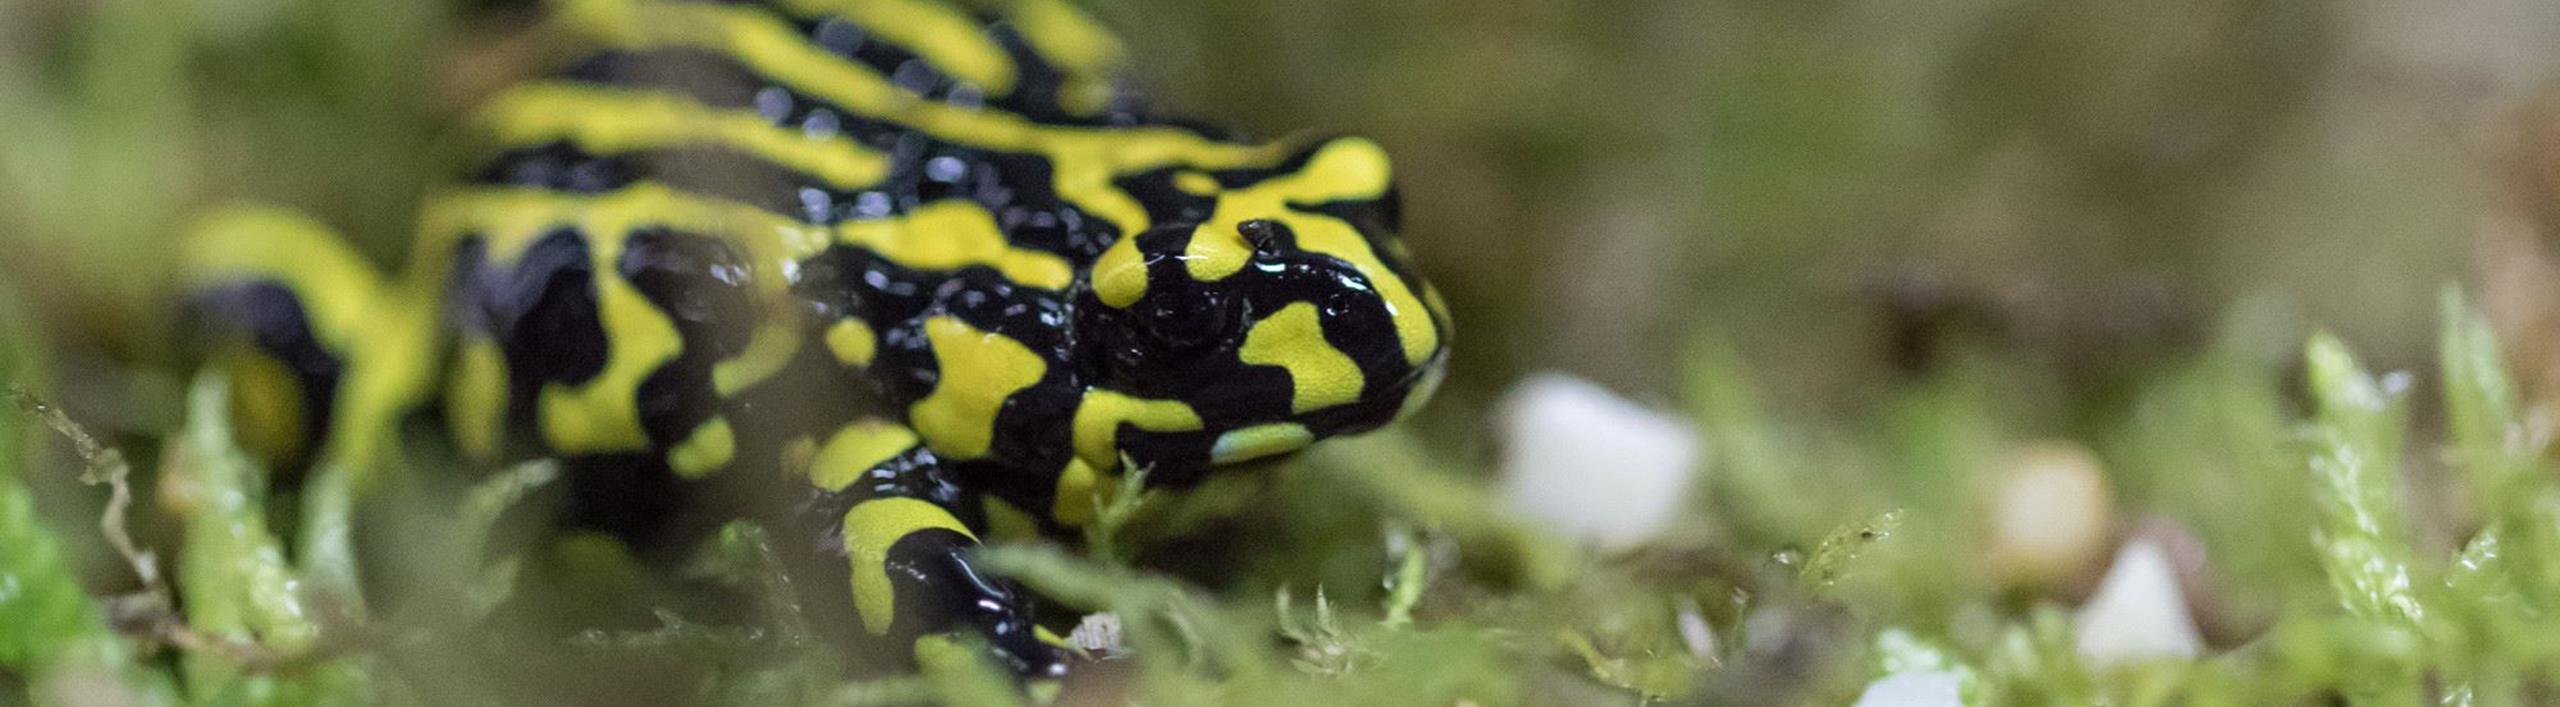 Southern Corroboree Frog standing on pale green moss. Frog is bright yellow and black striped.